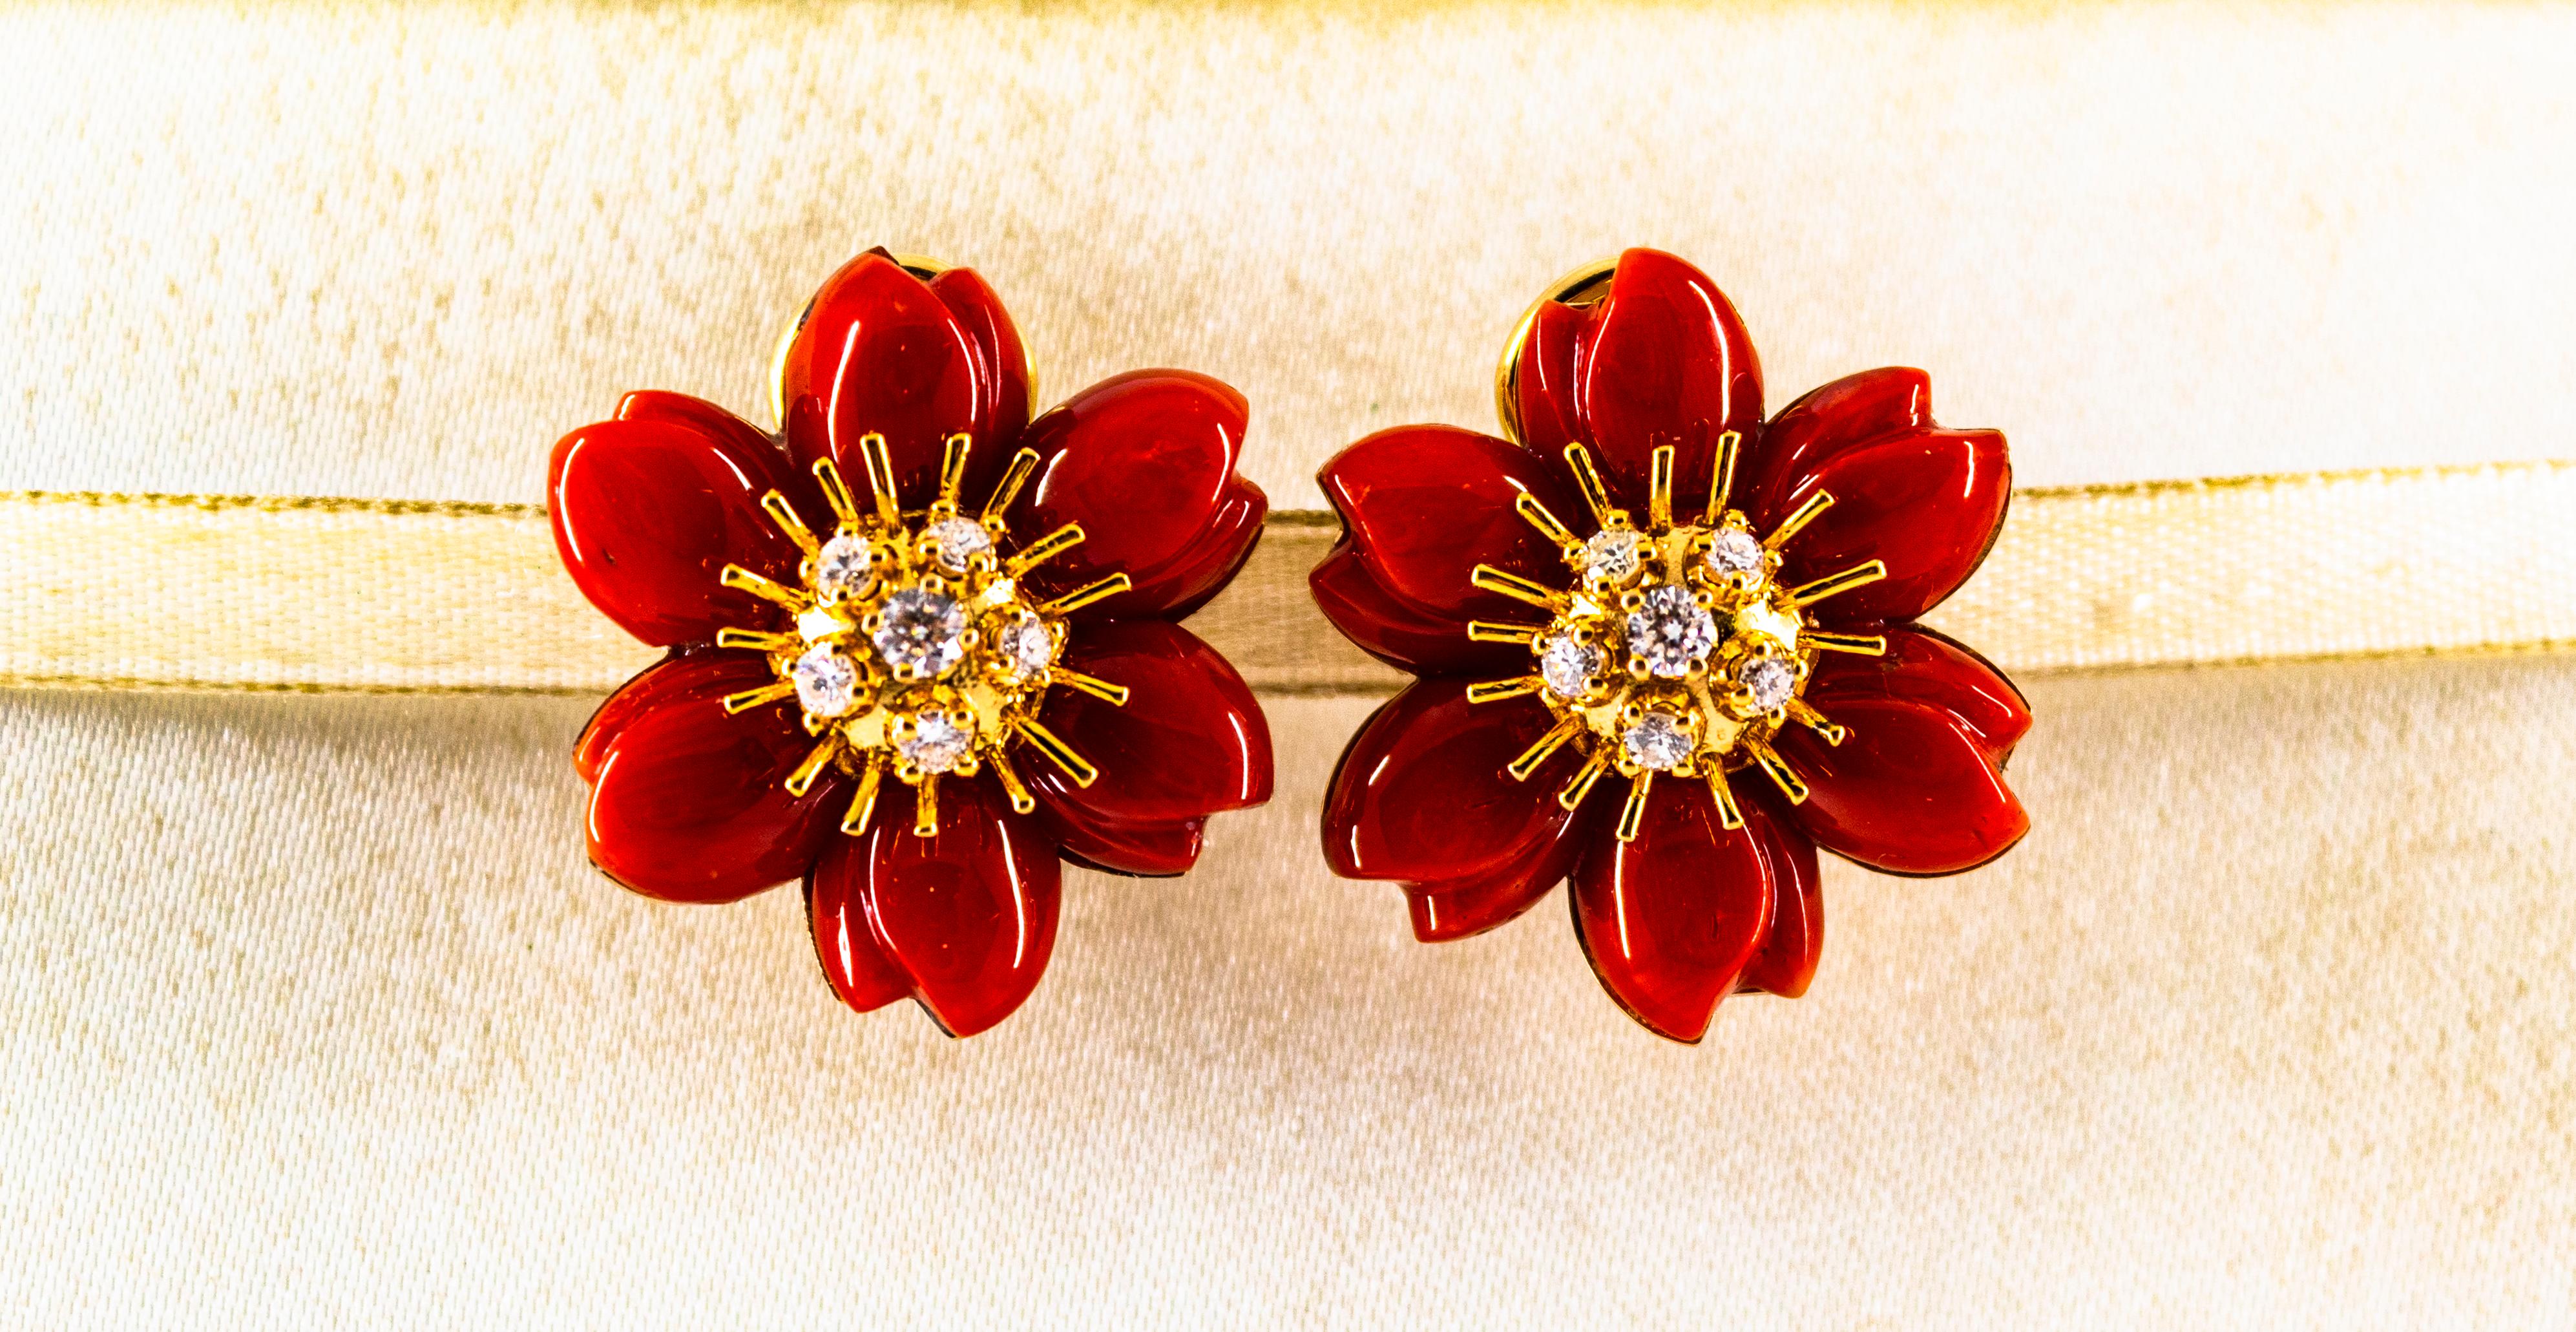 These Earrings are made of 14K Yellow Gold.
These Earrings have 0.60 Carats of White Brilliant Cut Diamonds.
These Earrings have Hand cut Mediterranean (Sardinia, Italy) Red Coral.

These Earrings are available also in White Coral, Pink Coral,